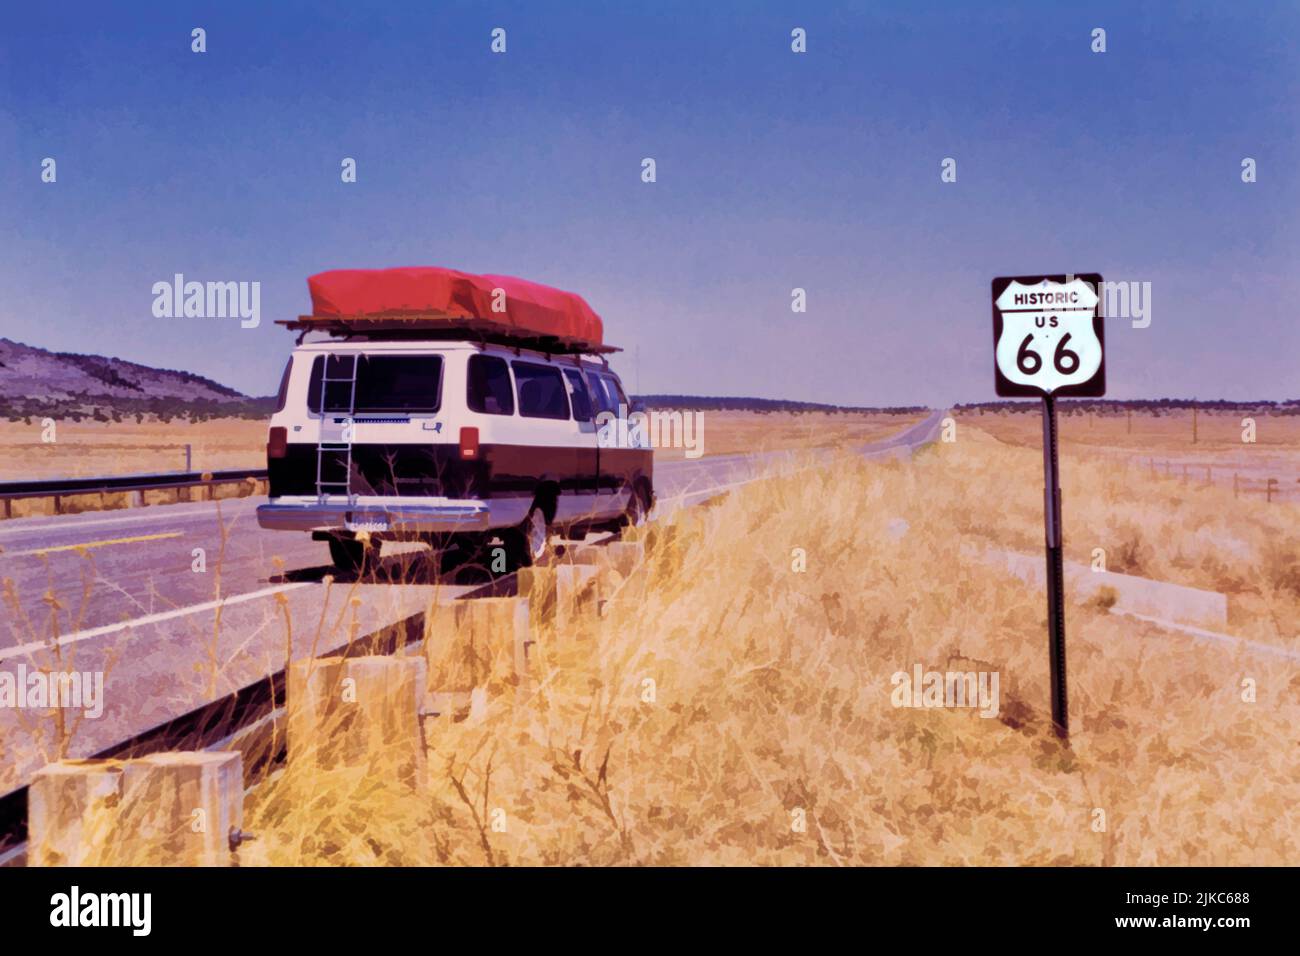 Travelling in the USA, Camper van parked on Route 66, Stock Photo